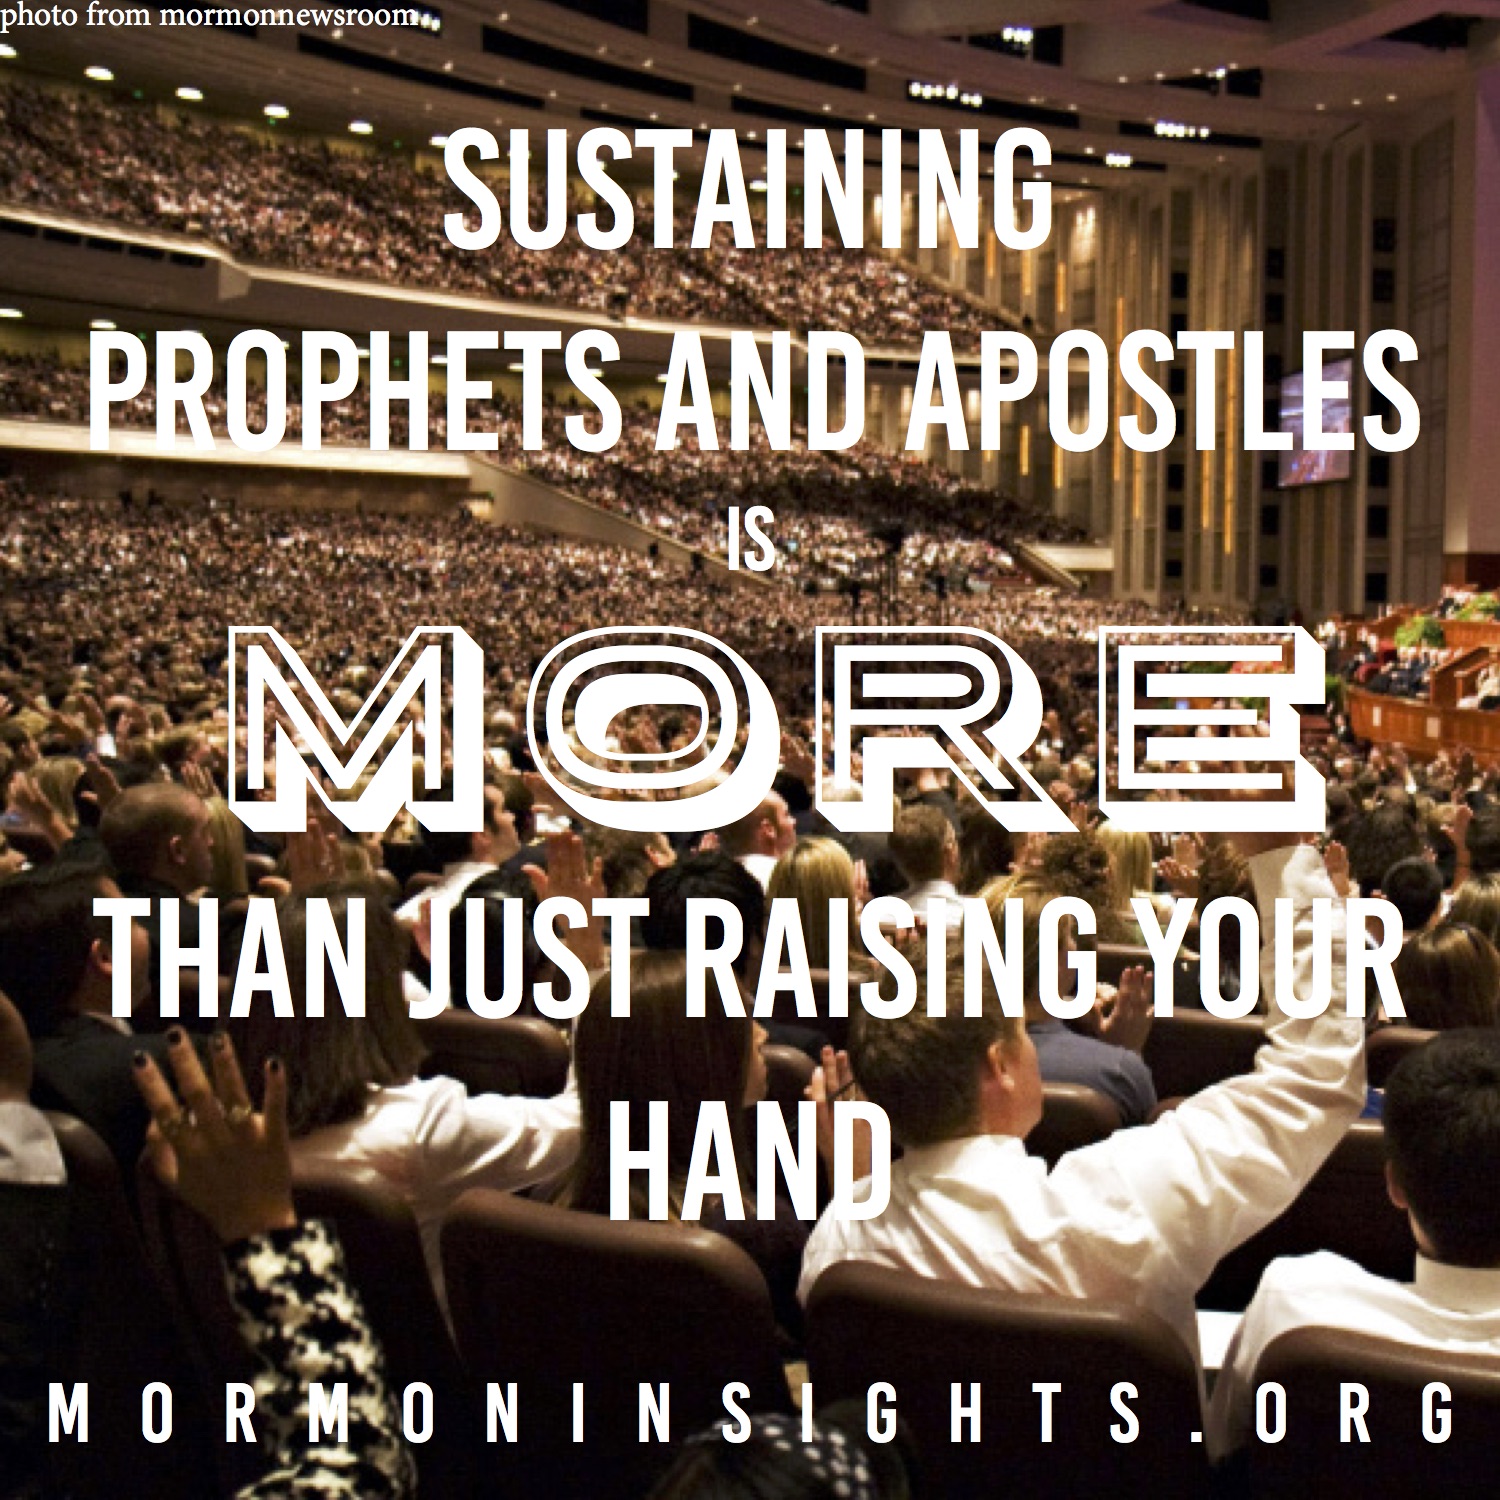 Sustaining prophets and apostles is more than just raising your hand